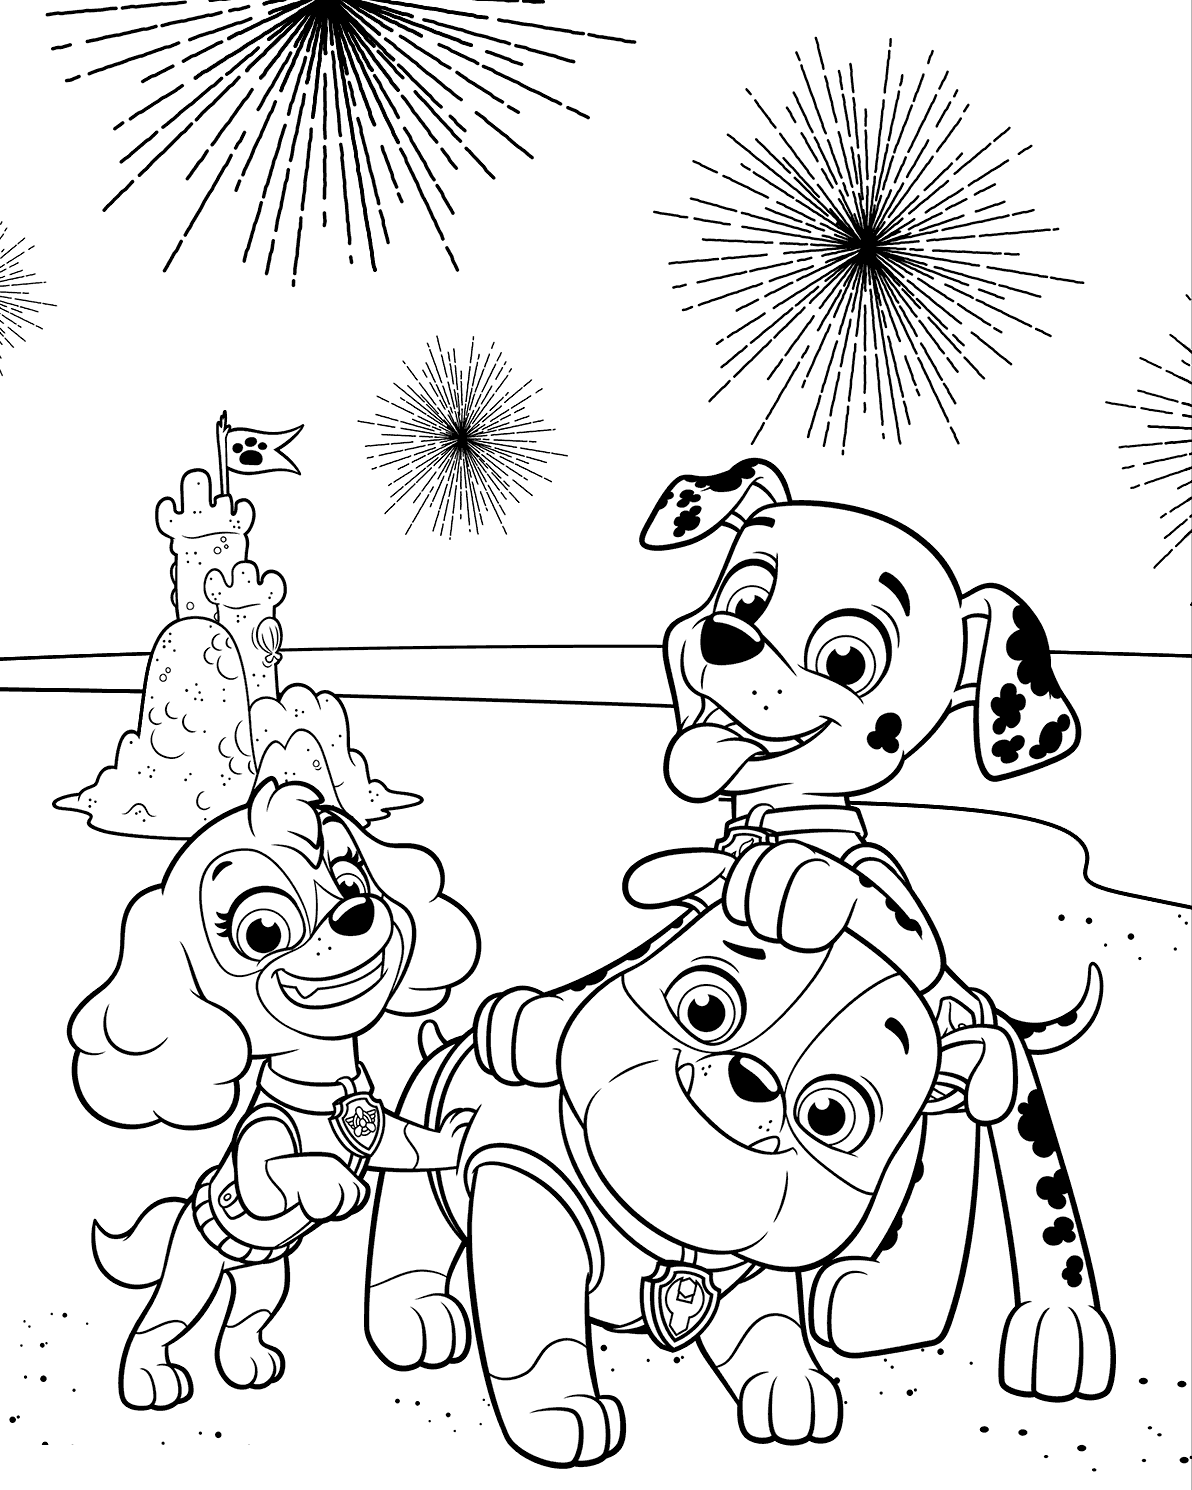 PAW Patrol 4th Of July Coloring Page